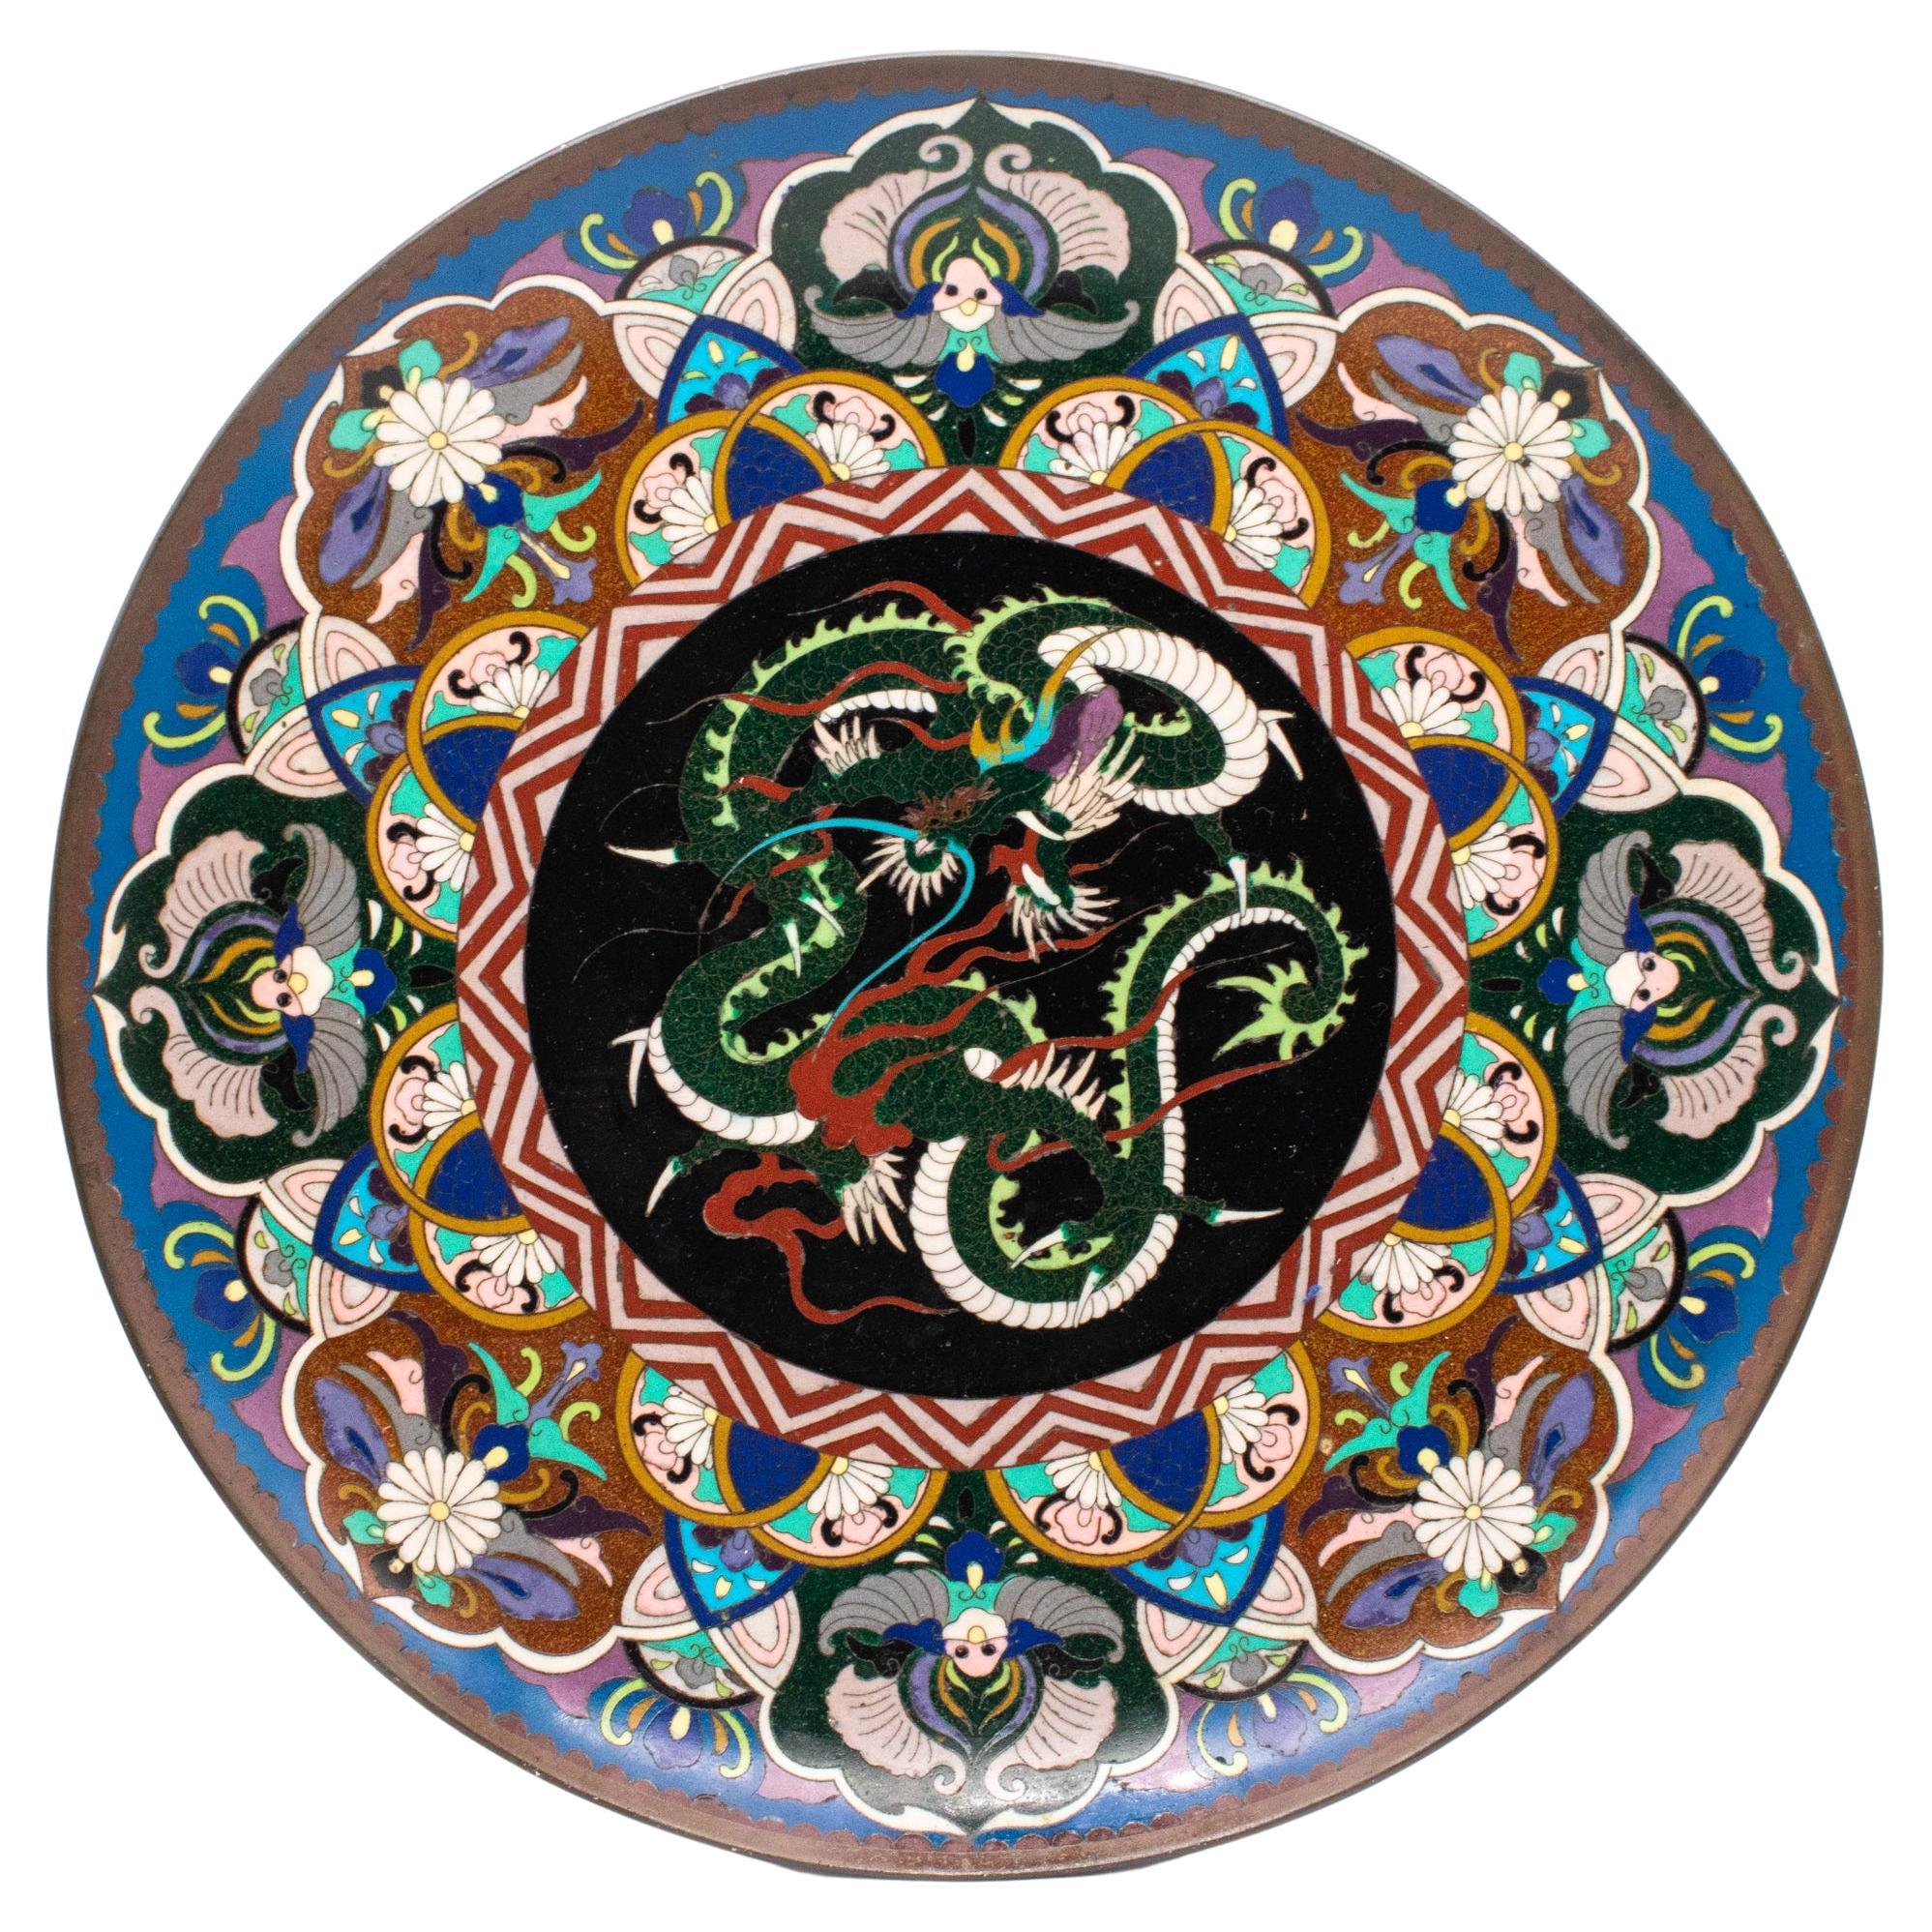 Japan 1900 Meiji Period Charger With A Dragon In Cloisonné Multicolor Enamel